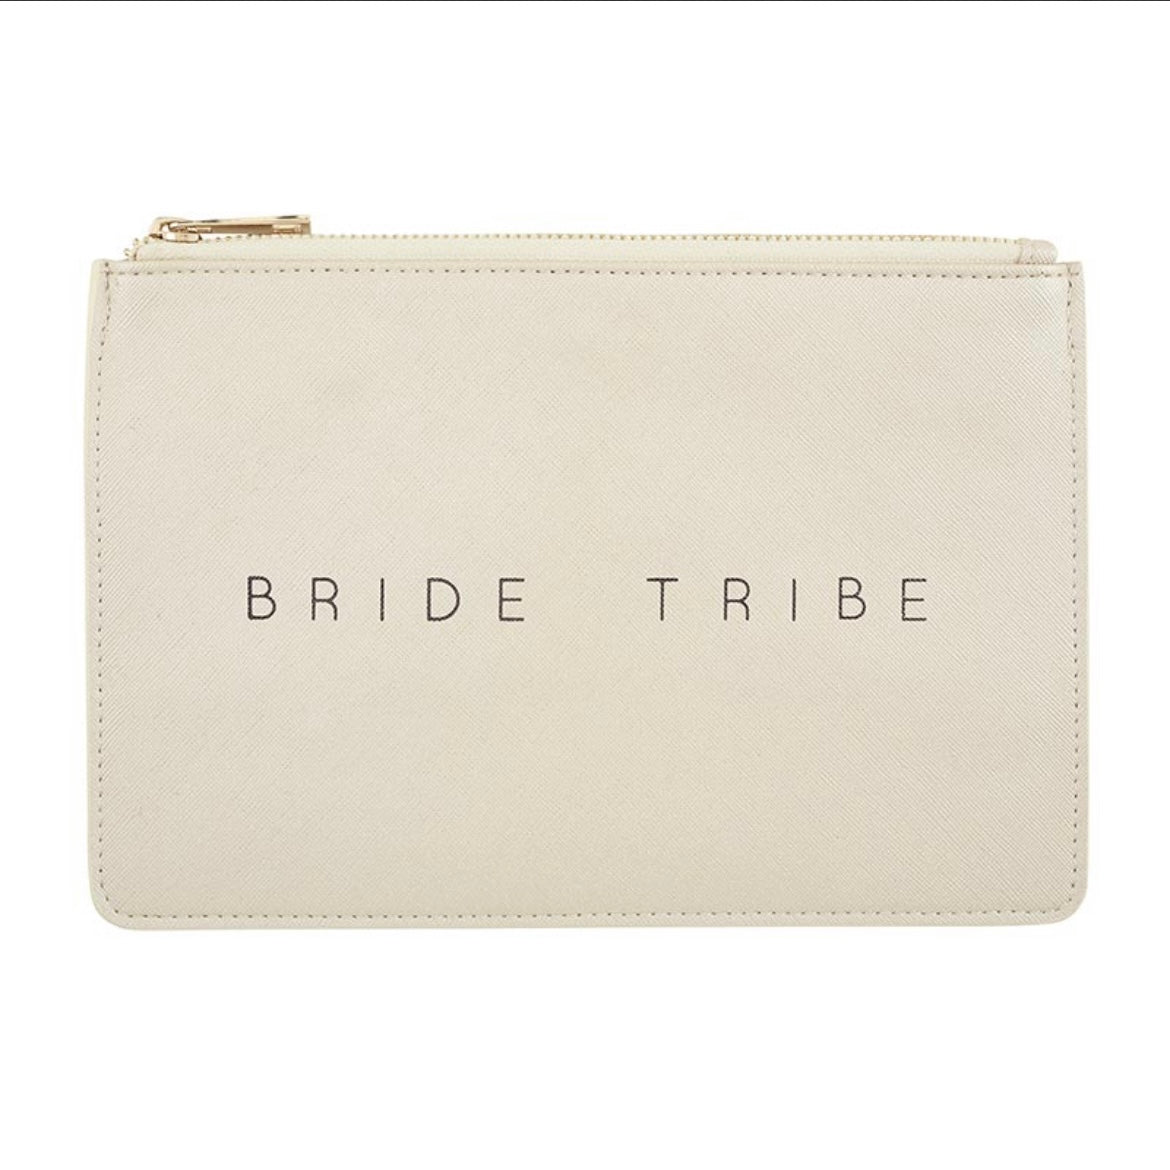 Bride Tribe Pouch Clutch